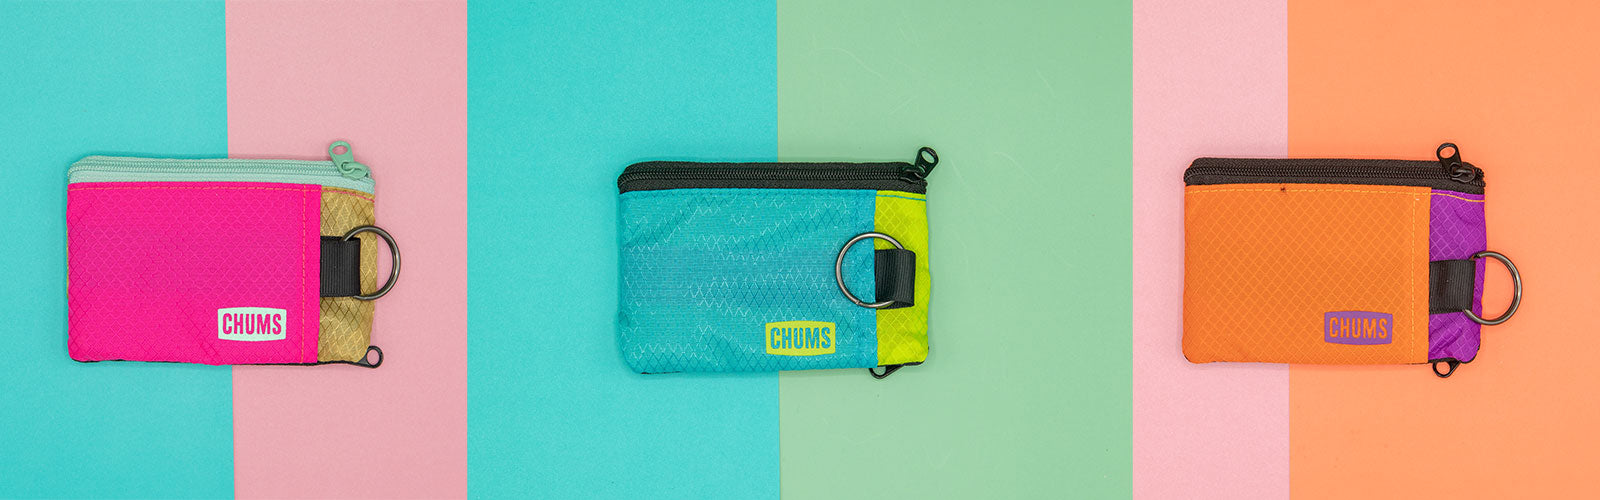 chums-surfshorts-water-resistant-zippered-wallet-with-key-ring-colors